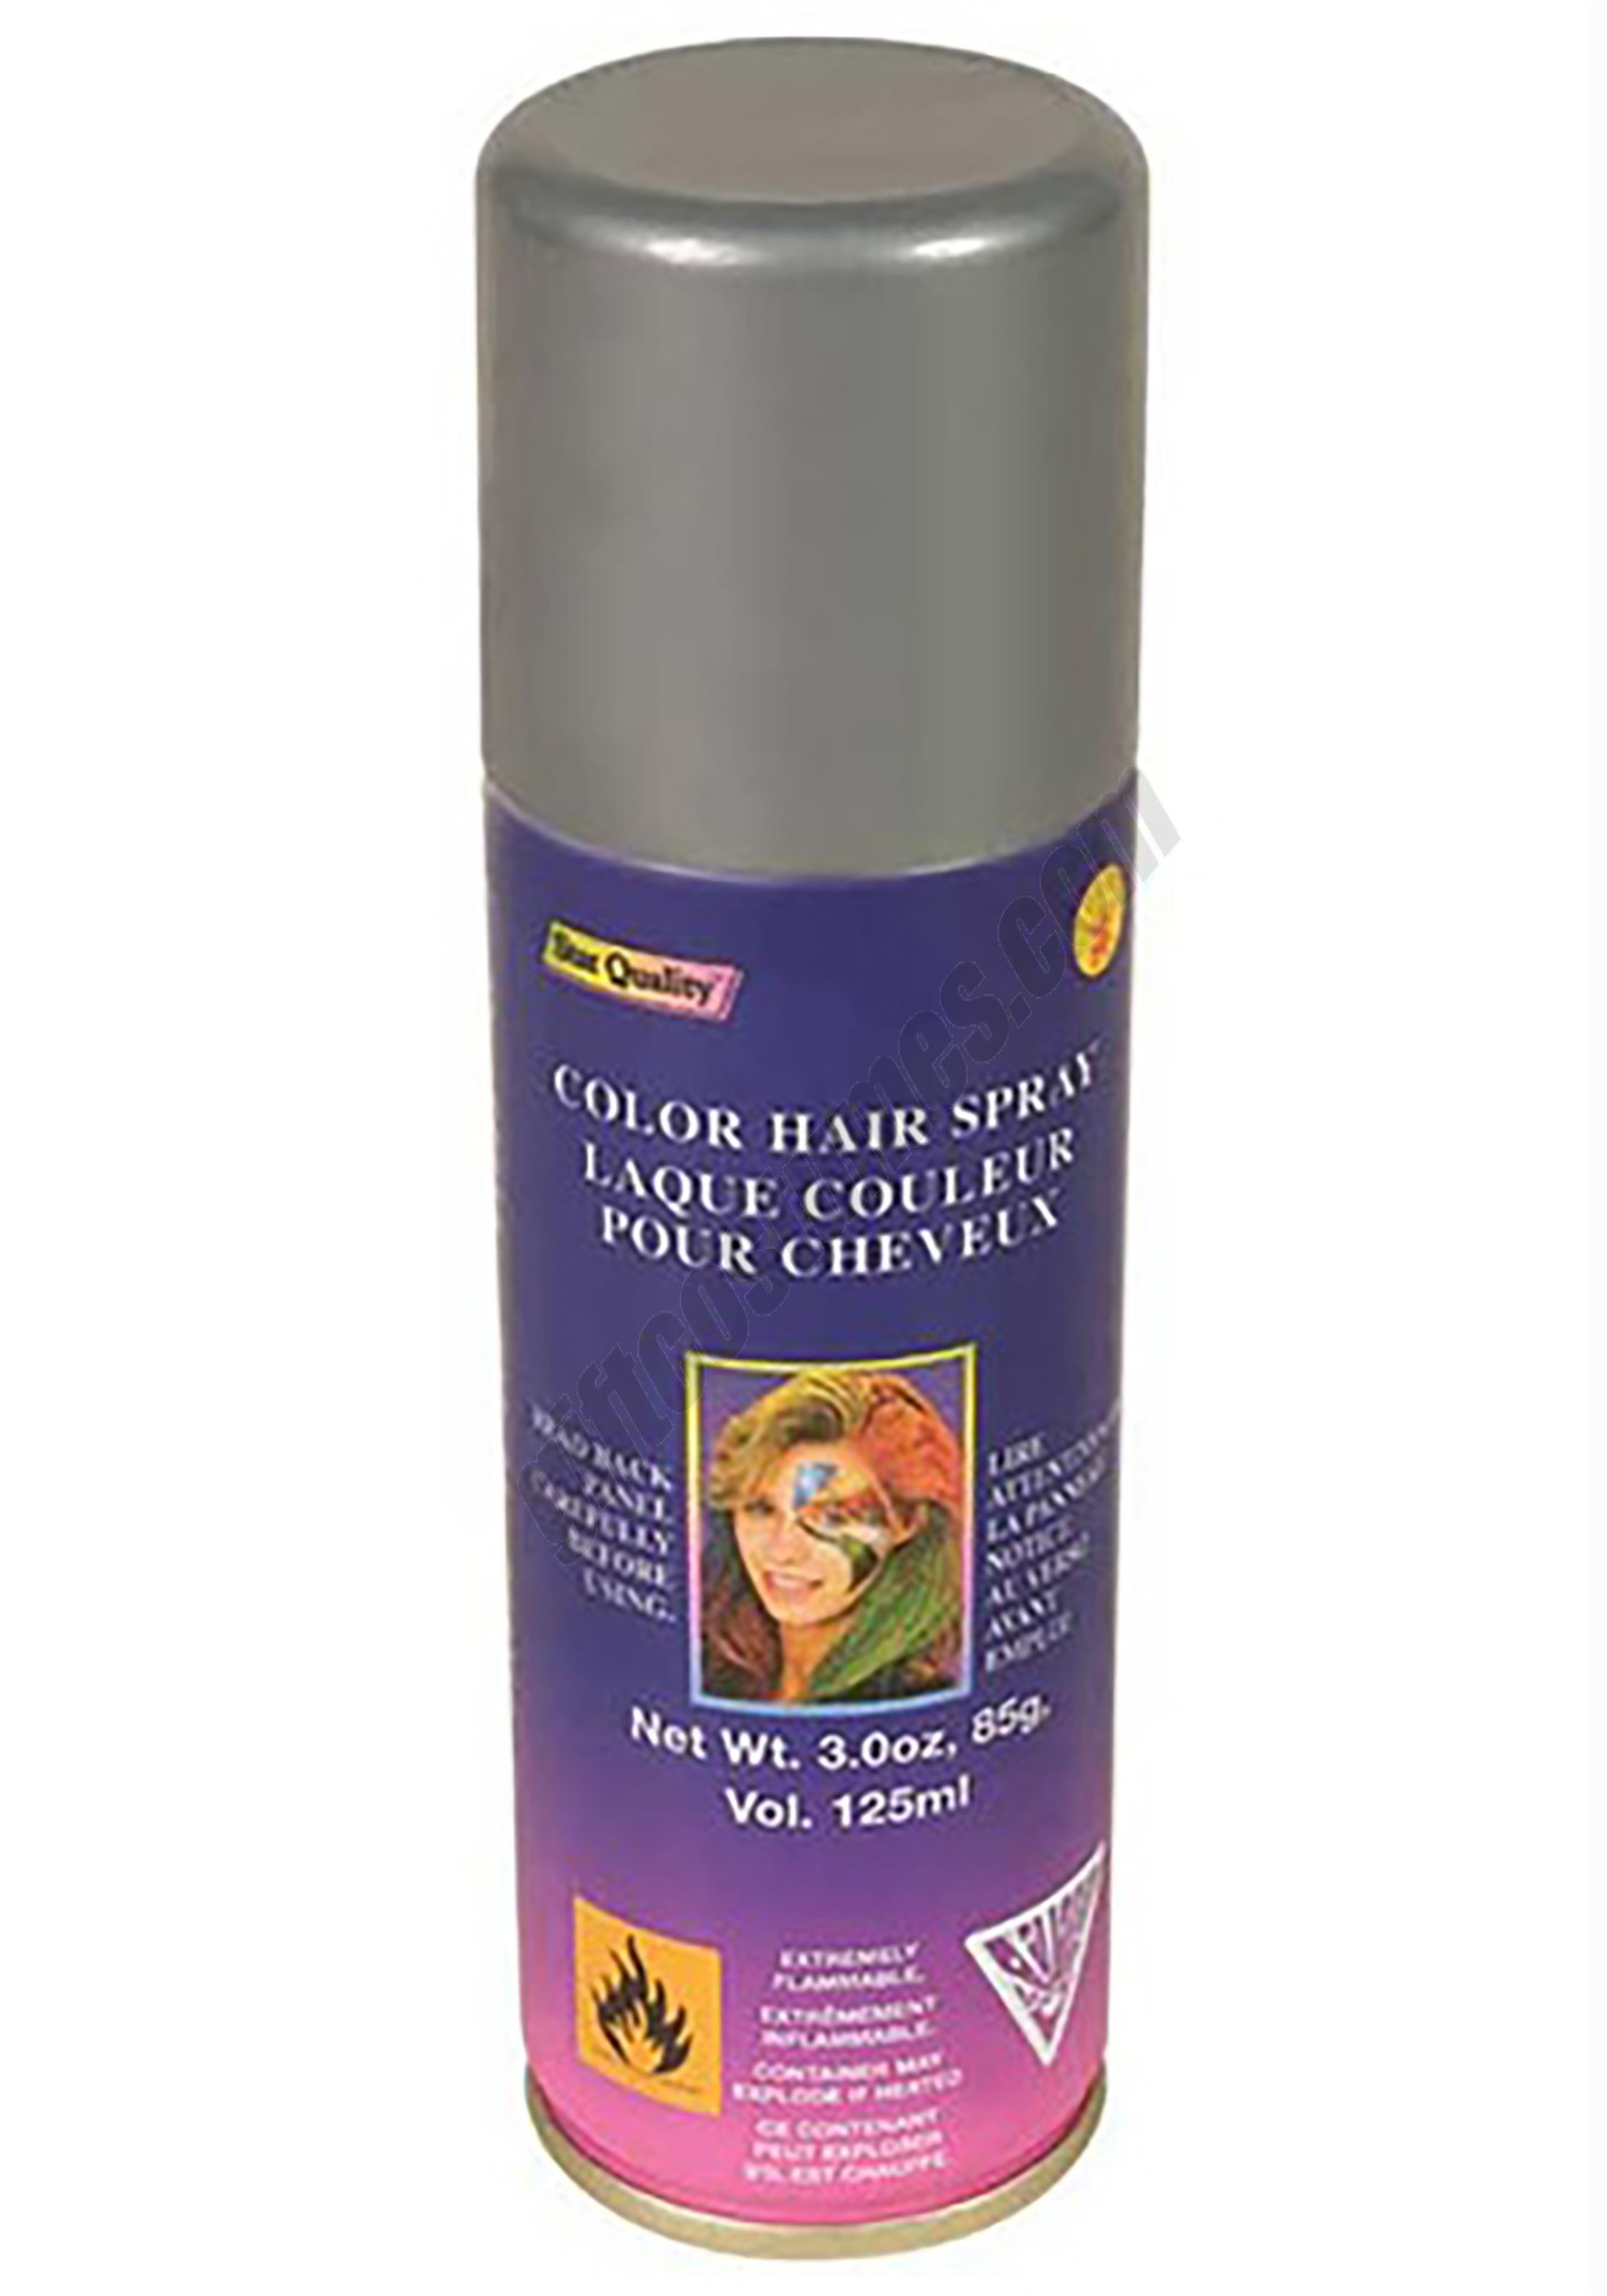 Silver Hair Spray Promotions - Silver Hair Spray Promotions